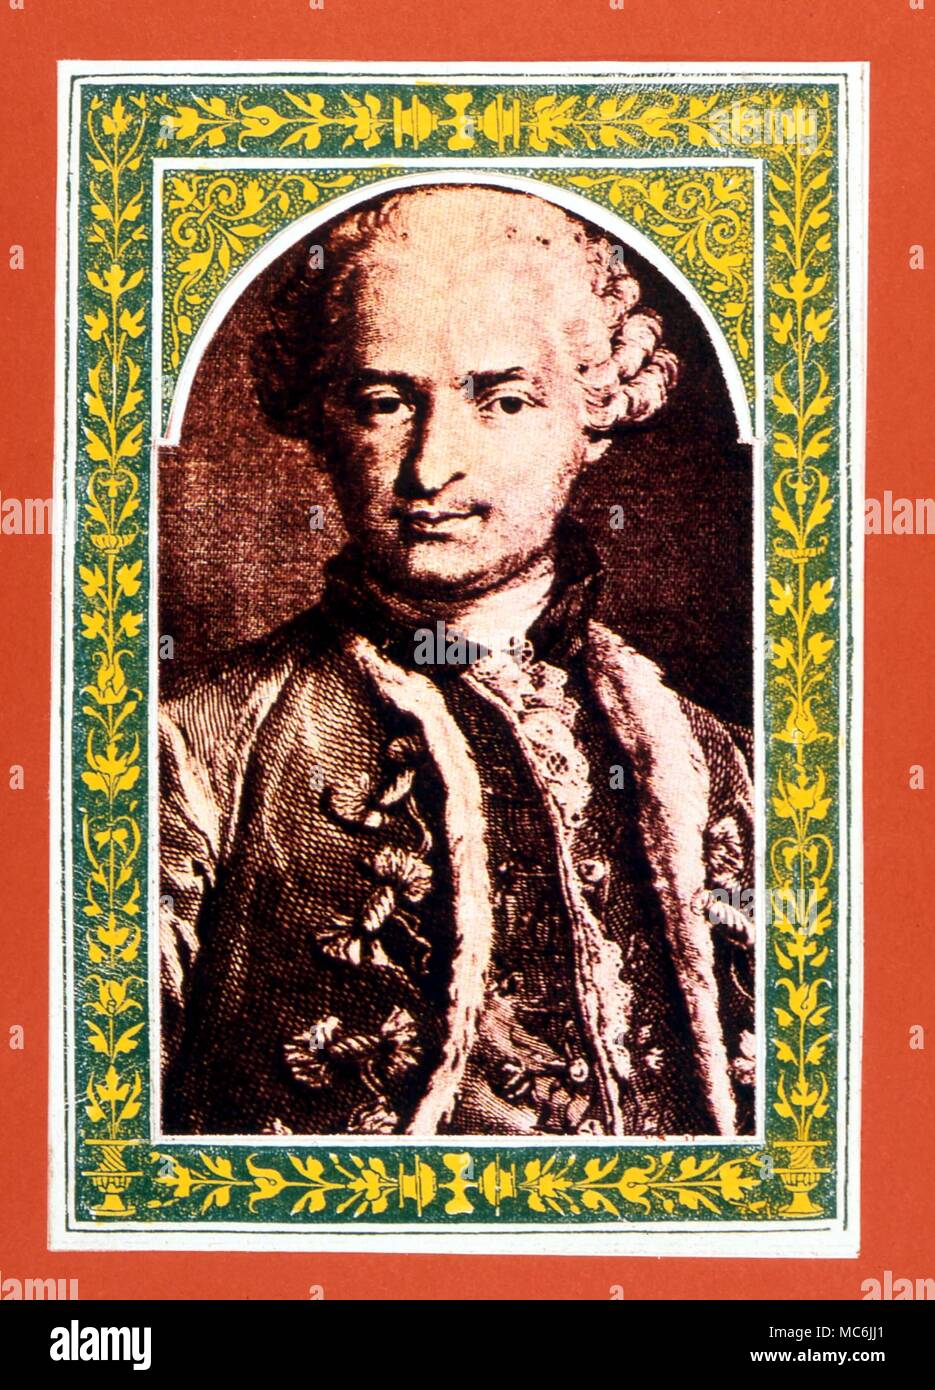 OCCULTISTS - ST GERMAIN. Portrait of the Comte de St Germain (1700?-1800?) in early 18th century dress. print after the original copperplate of 1783 by N Thomas (based on a lost painting formerly in the von Urfe Collection) Stock Photo